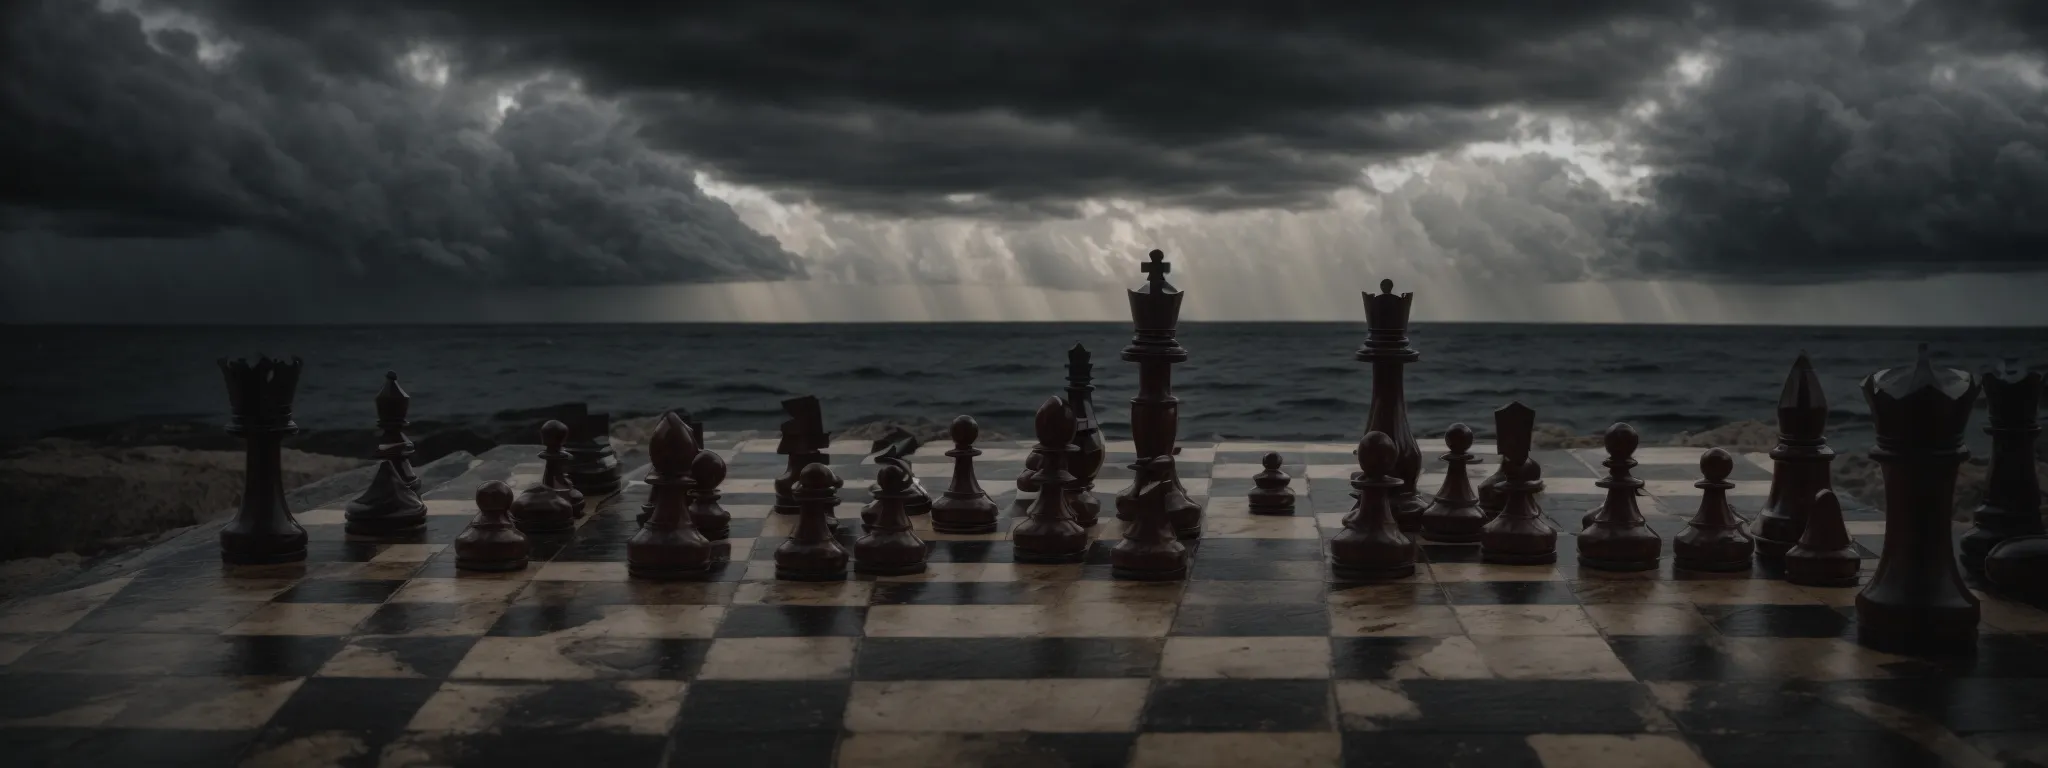 a chessboard with a fallen king piece and overshadowing dark clouds above.